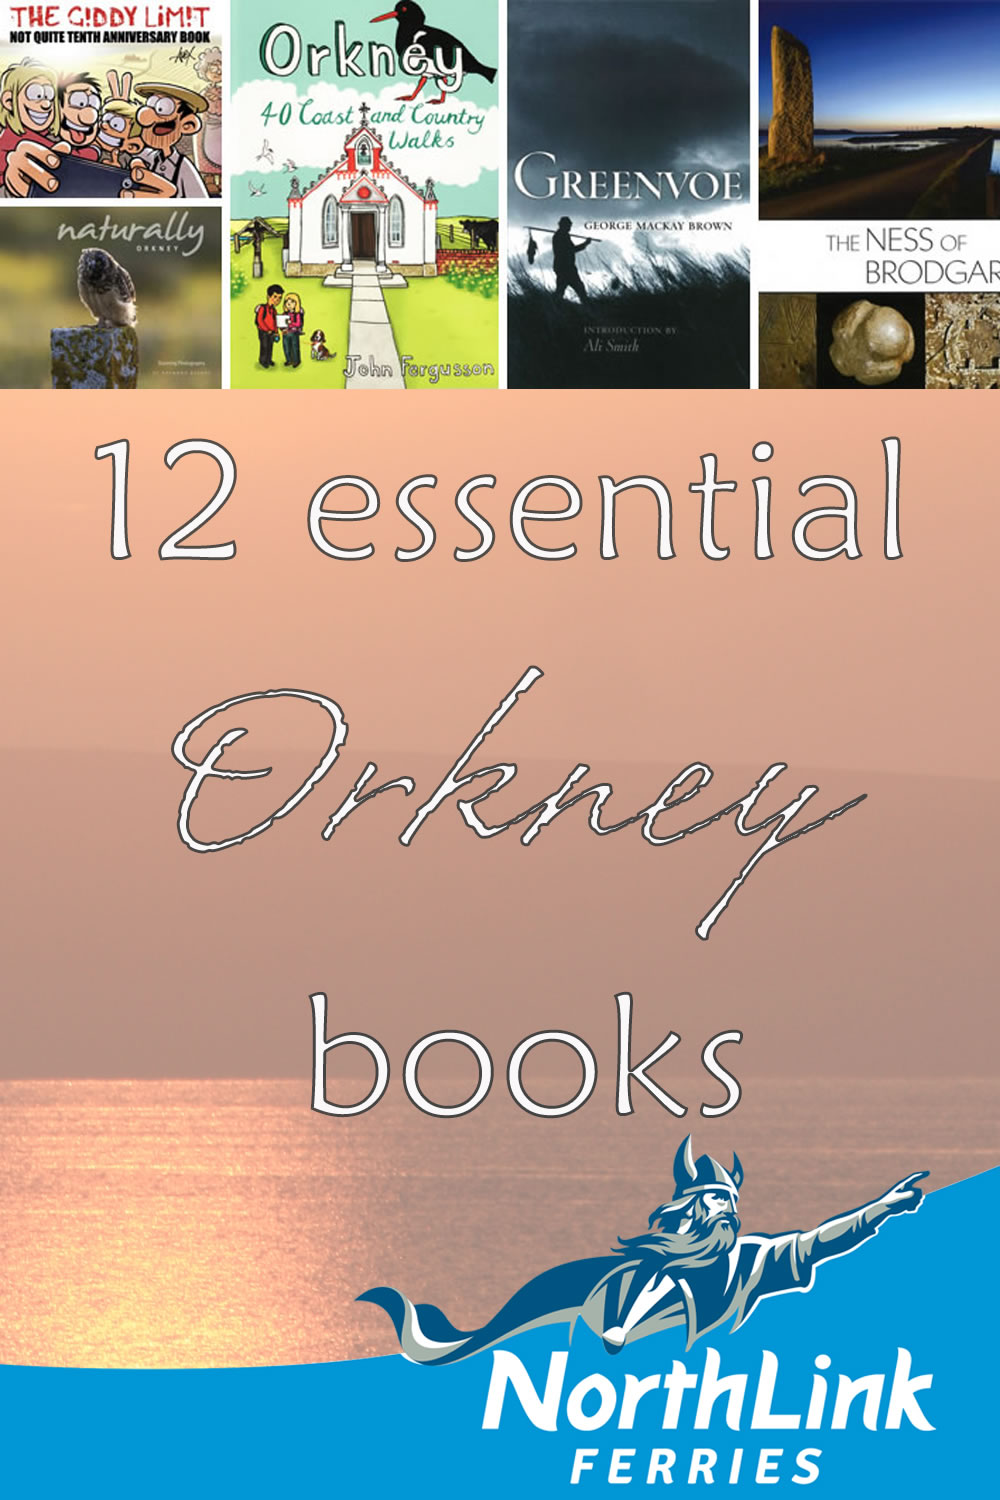 12 essential Orkney books